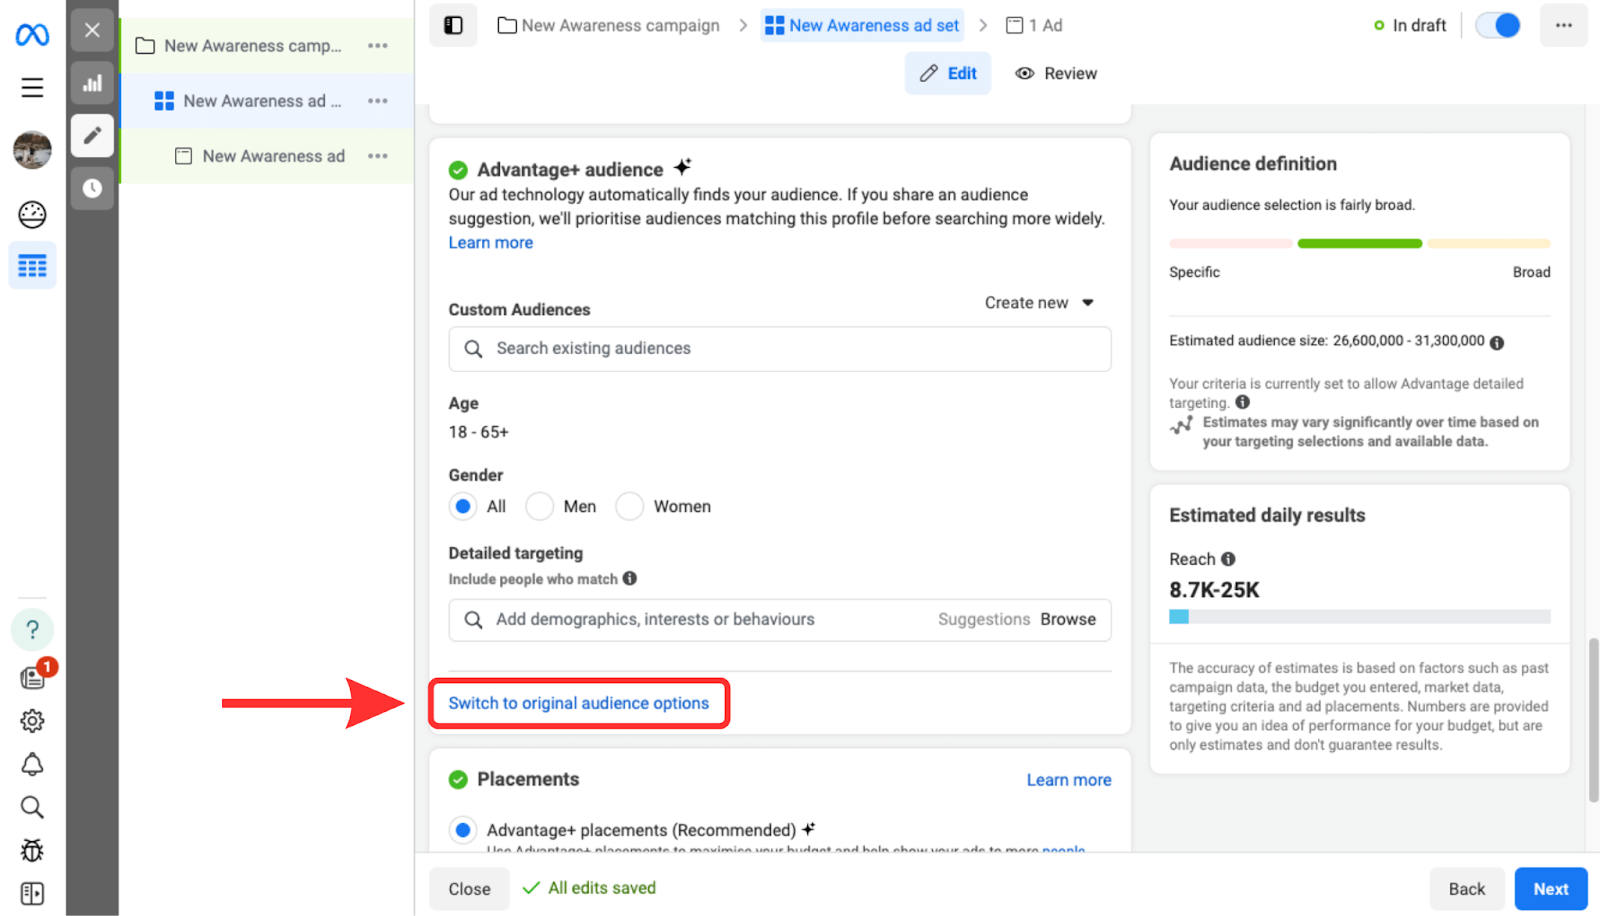 Screenshot showing how to advertise on Facebook with Facebook Ads Manager